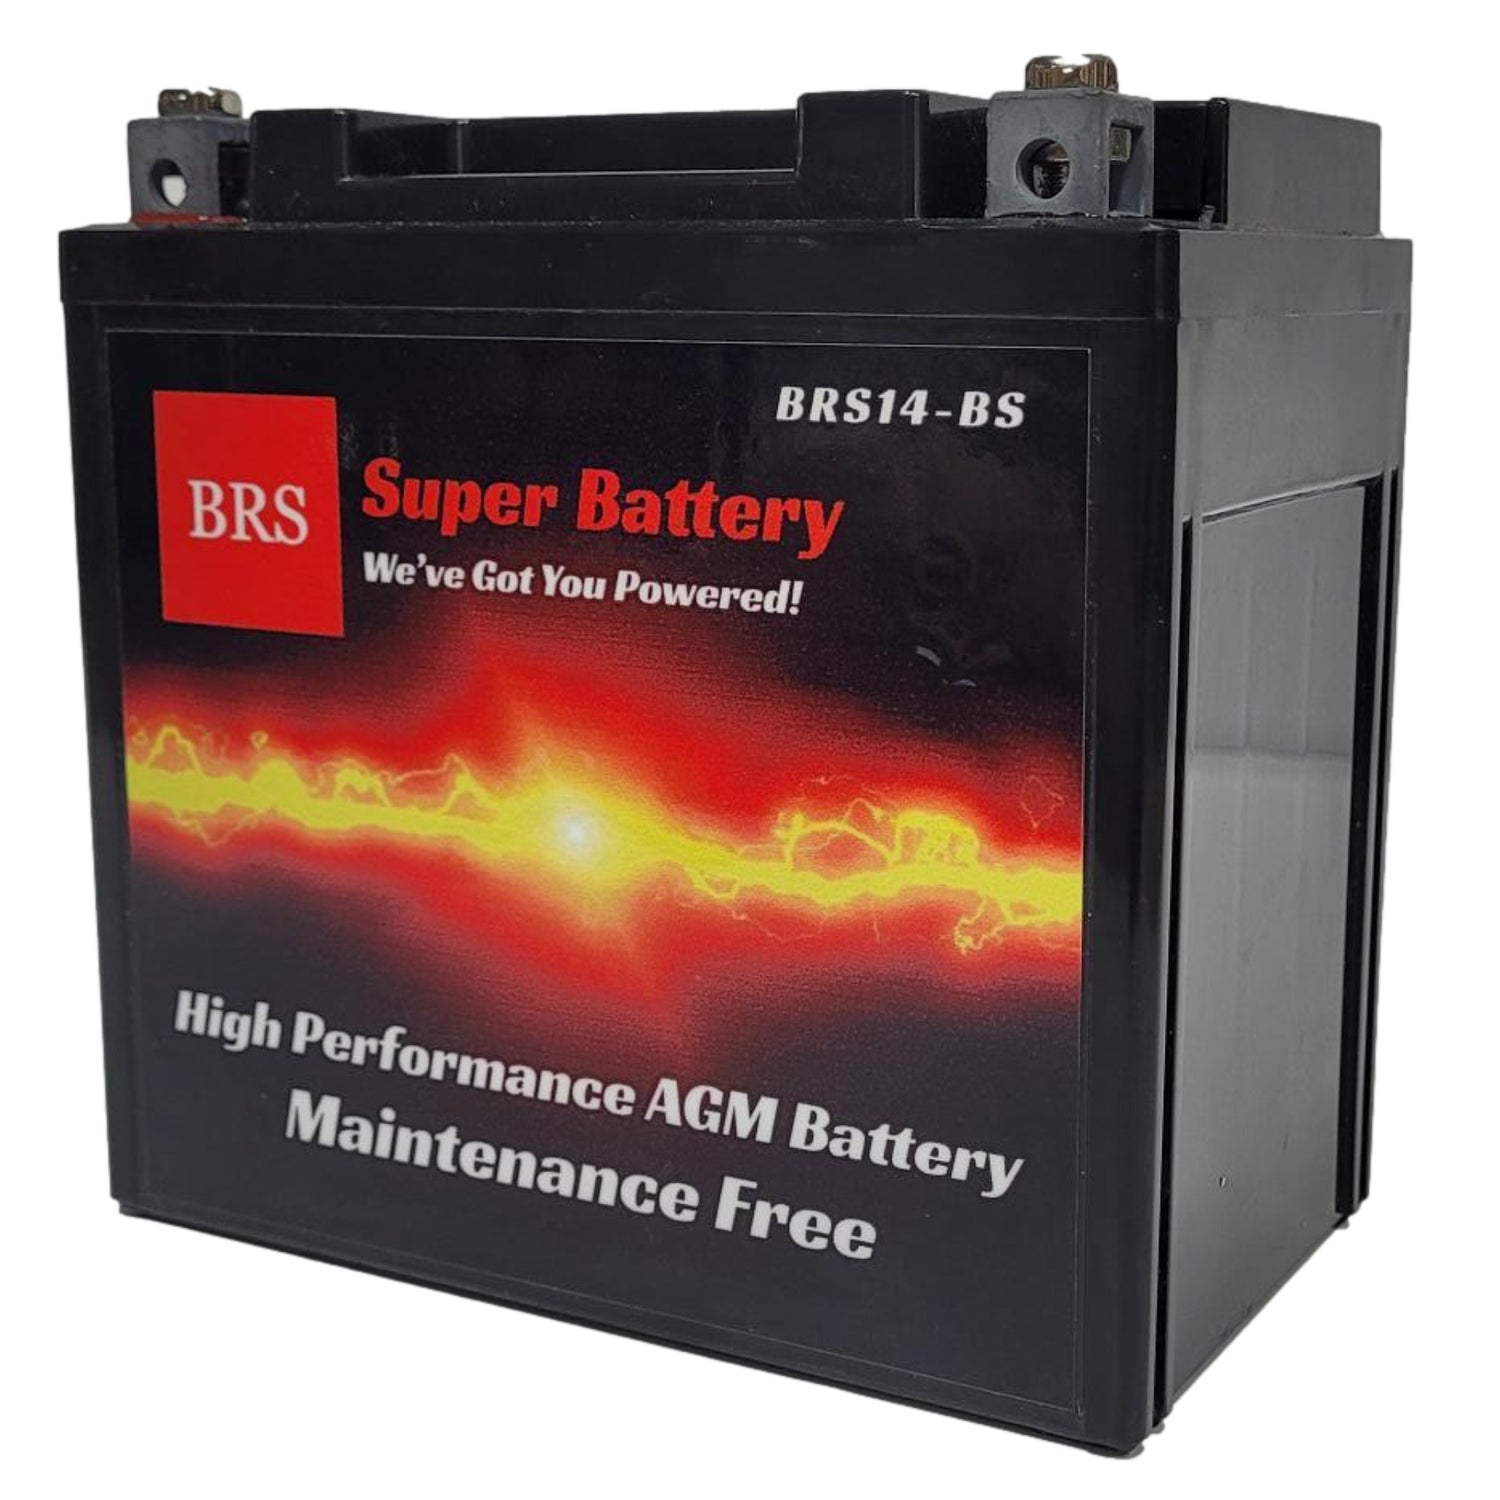 WPX14-BS 12v High Performance Sealed AGM PowerSport 2 Year Battery - BRS Super Battery